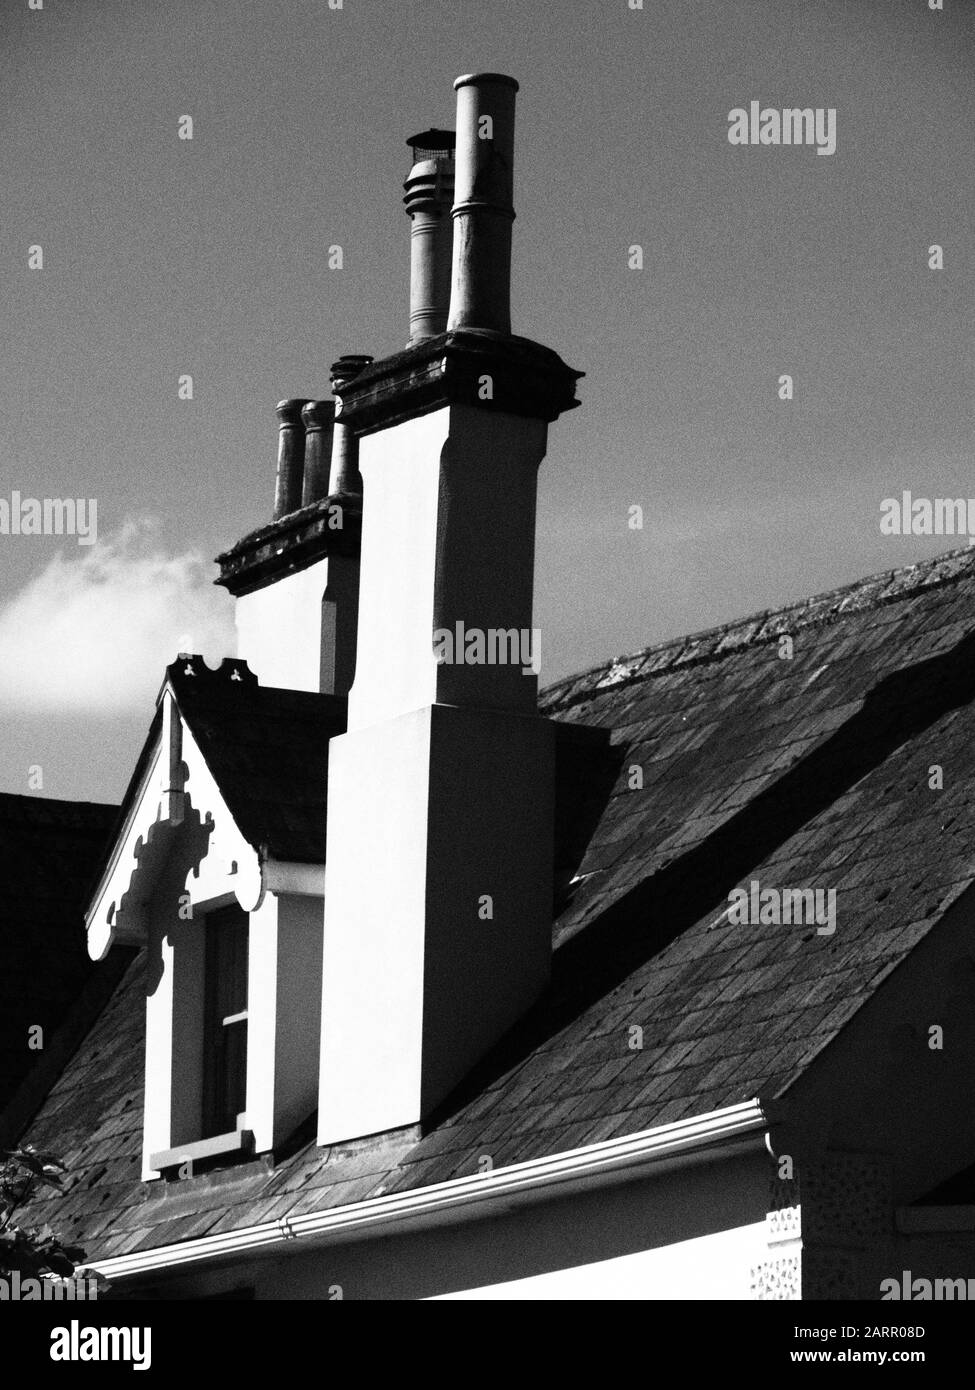 black and white, monochrome, picture of a tall old fashioned house chimney and dormer roof window Stock Photo